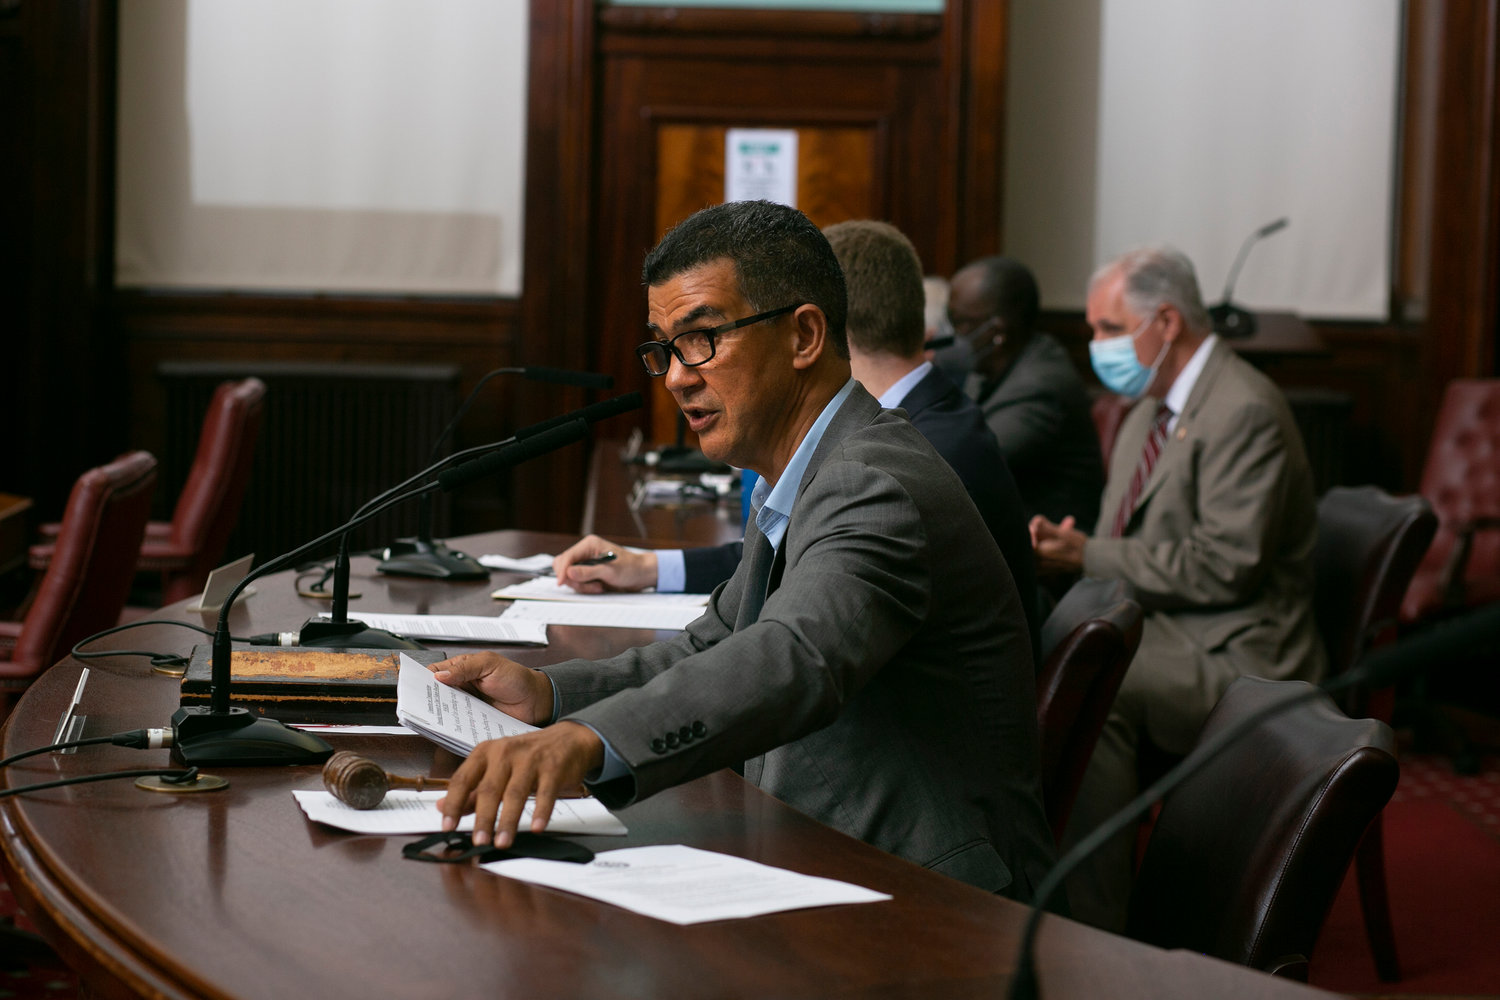 Ydanis Rodriguez is leaving the city council in just a couple weeks after serving 12 years. Rodriguez was part of Mayor-elect Eric Adams’ transition team, earning a nod just this week to serve as the city’s new transportation commissioner.